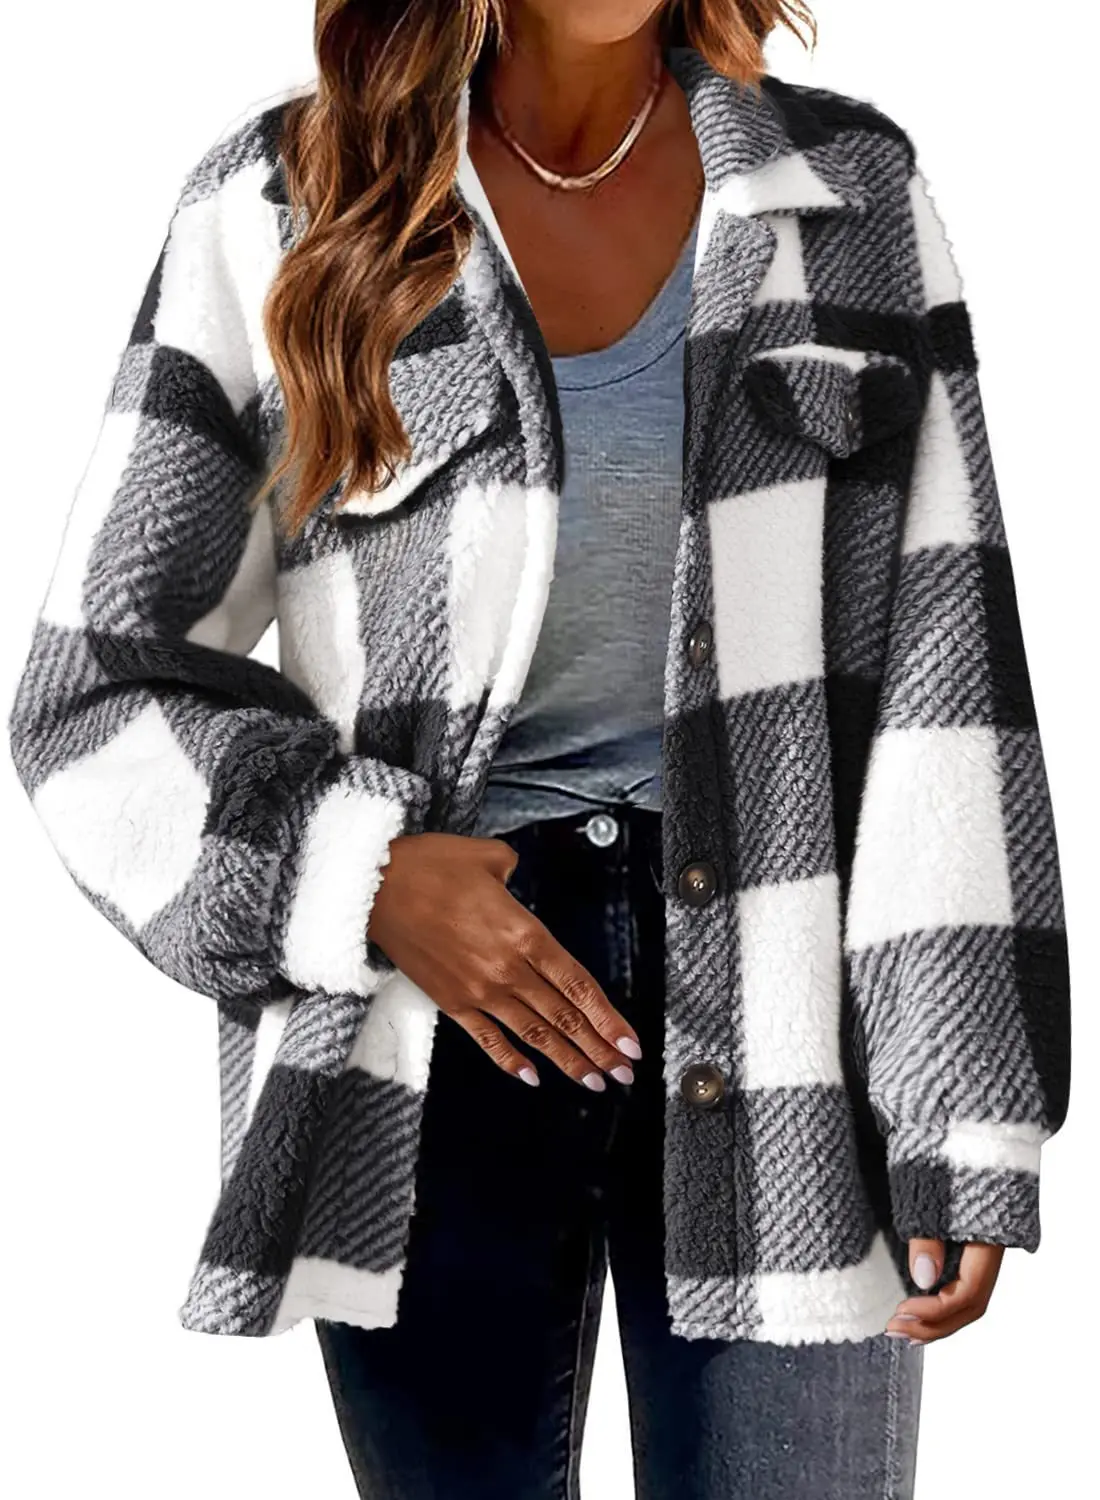 Jacket for Women Fall and Winter Fashion New Long-sleeved Pockets Plaid Buttons Casual Coat